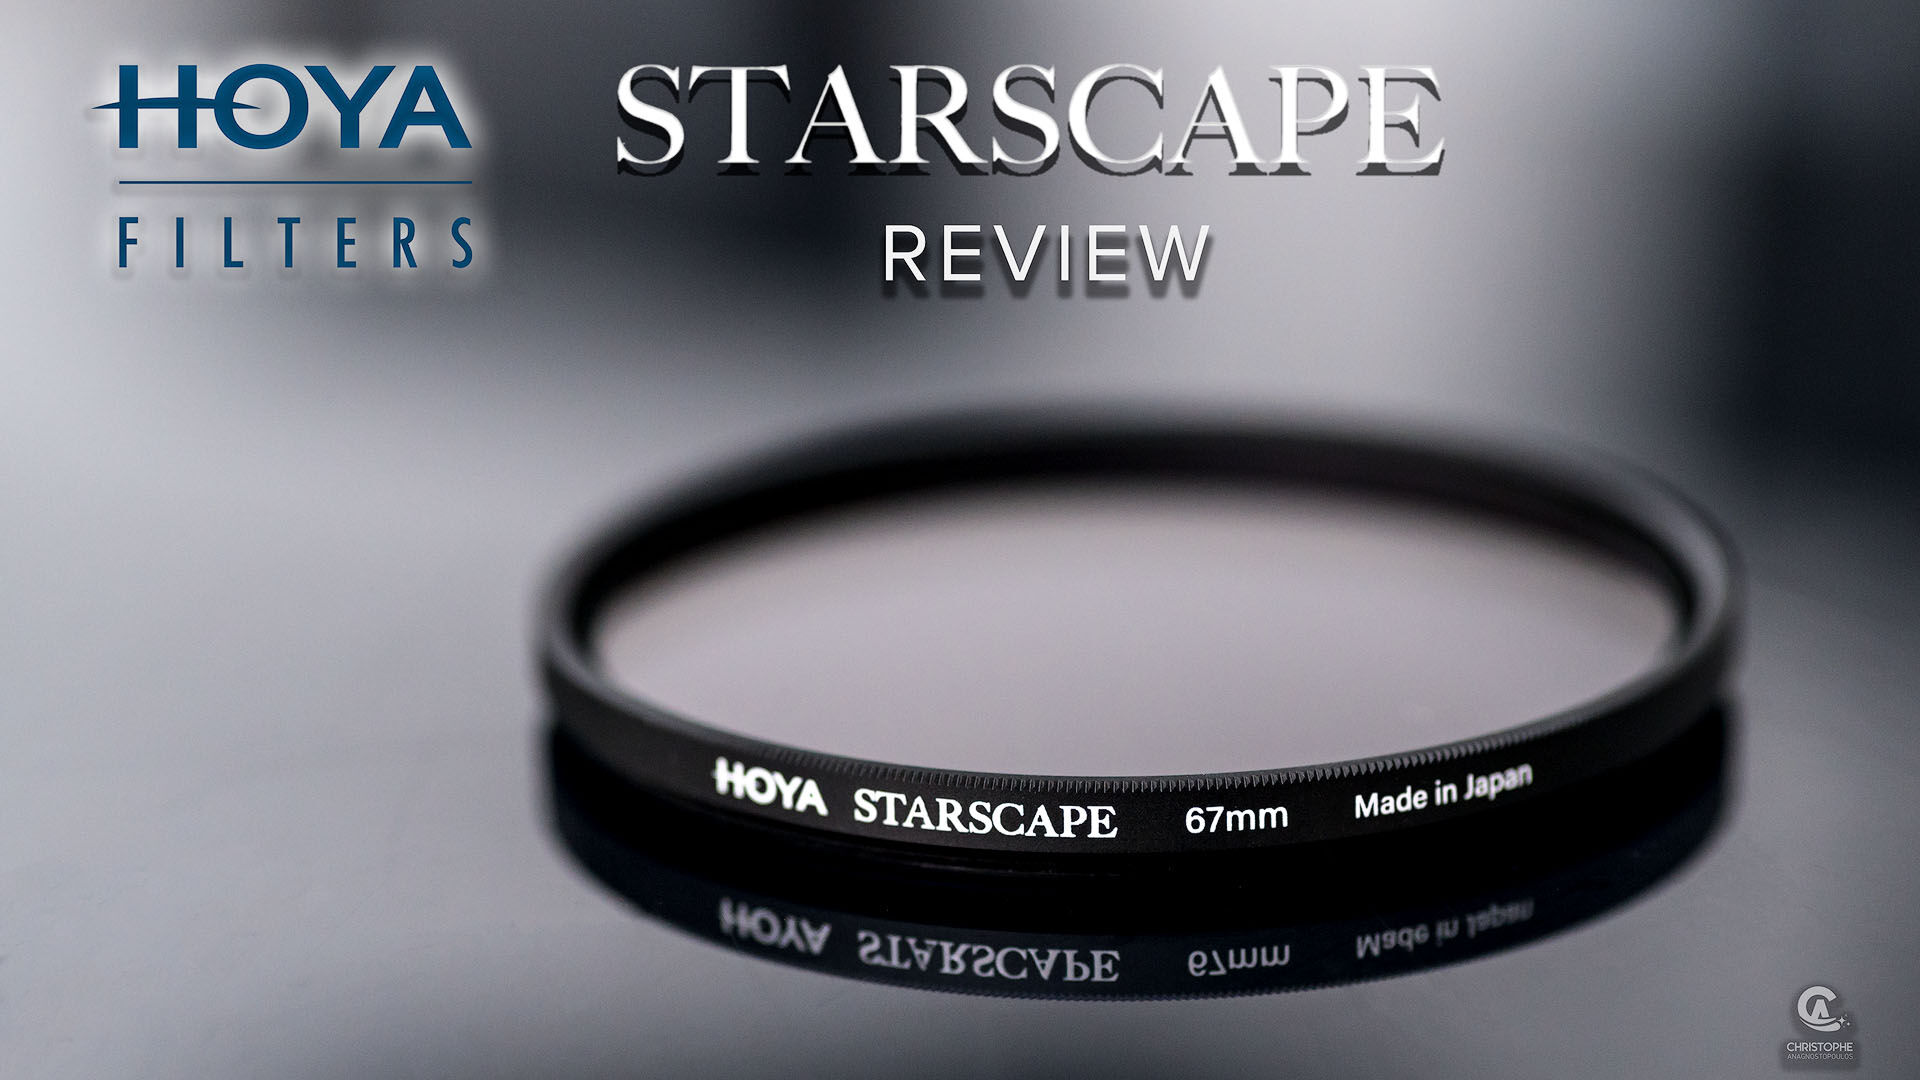 HOYA STARSCAPE Filter Review